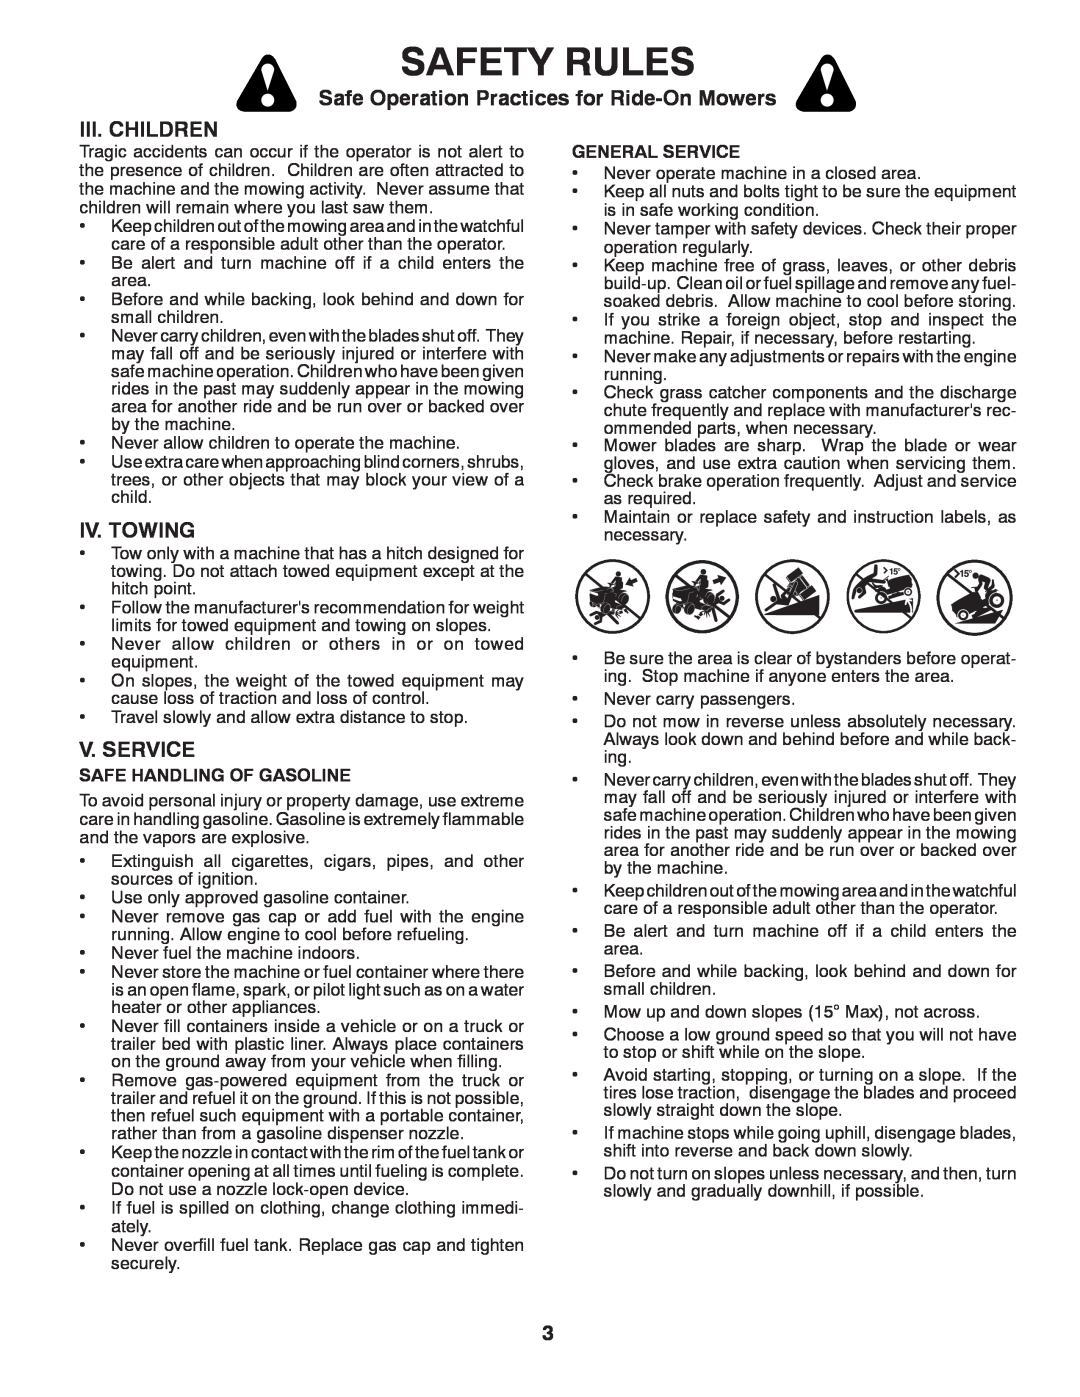 Dixon D26KH54 manual Iii. Children, Iv. Towing, V. Service, Safety Rules, Safe Operation Practices for Ride-On Mowers 